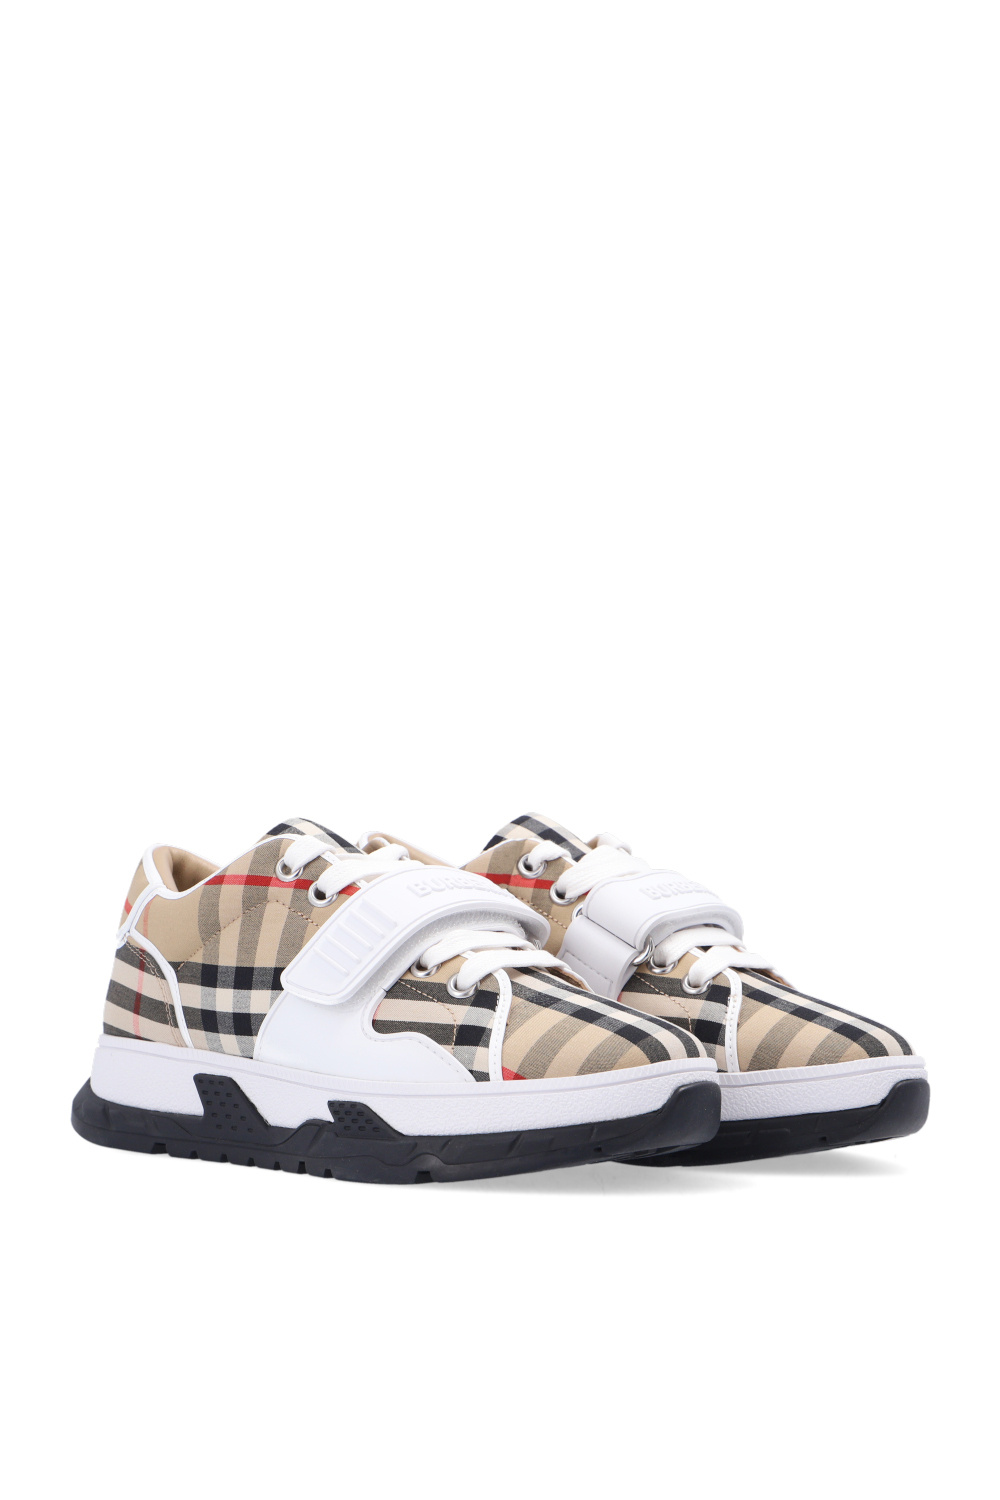 burberry for Kids Checked sneakers